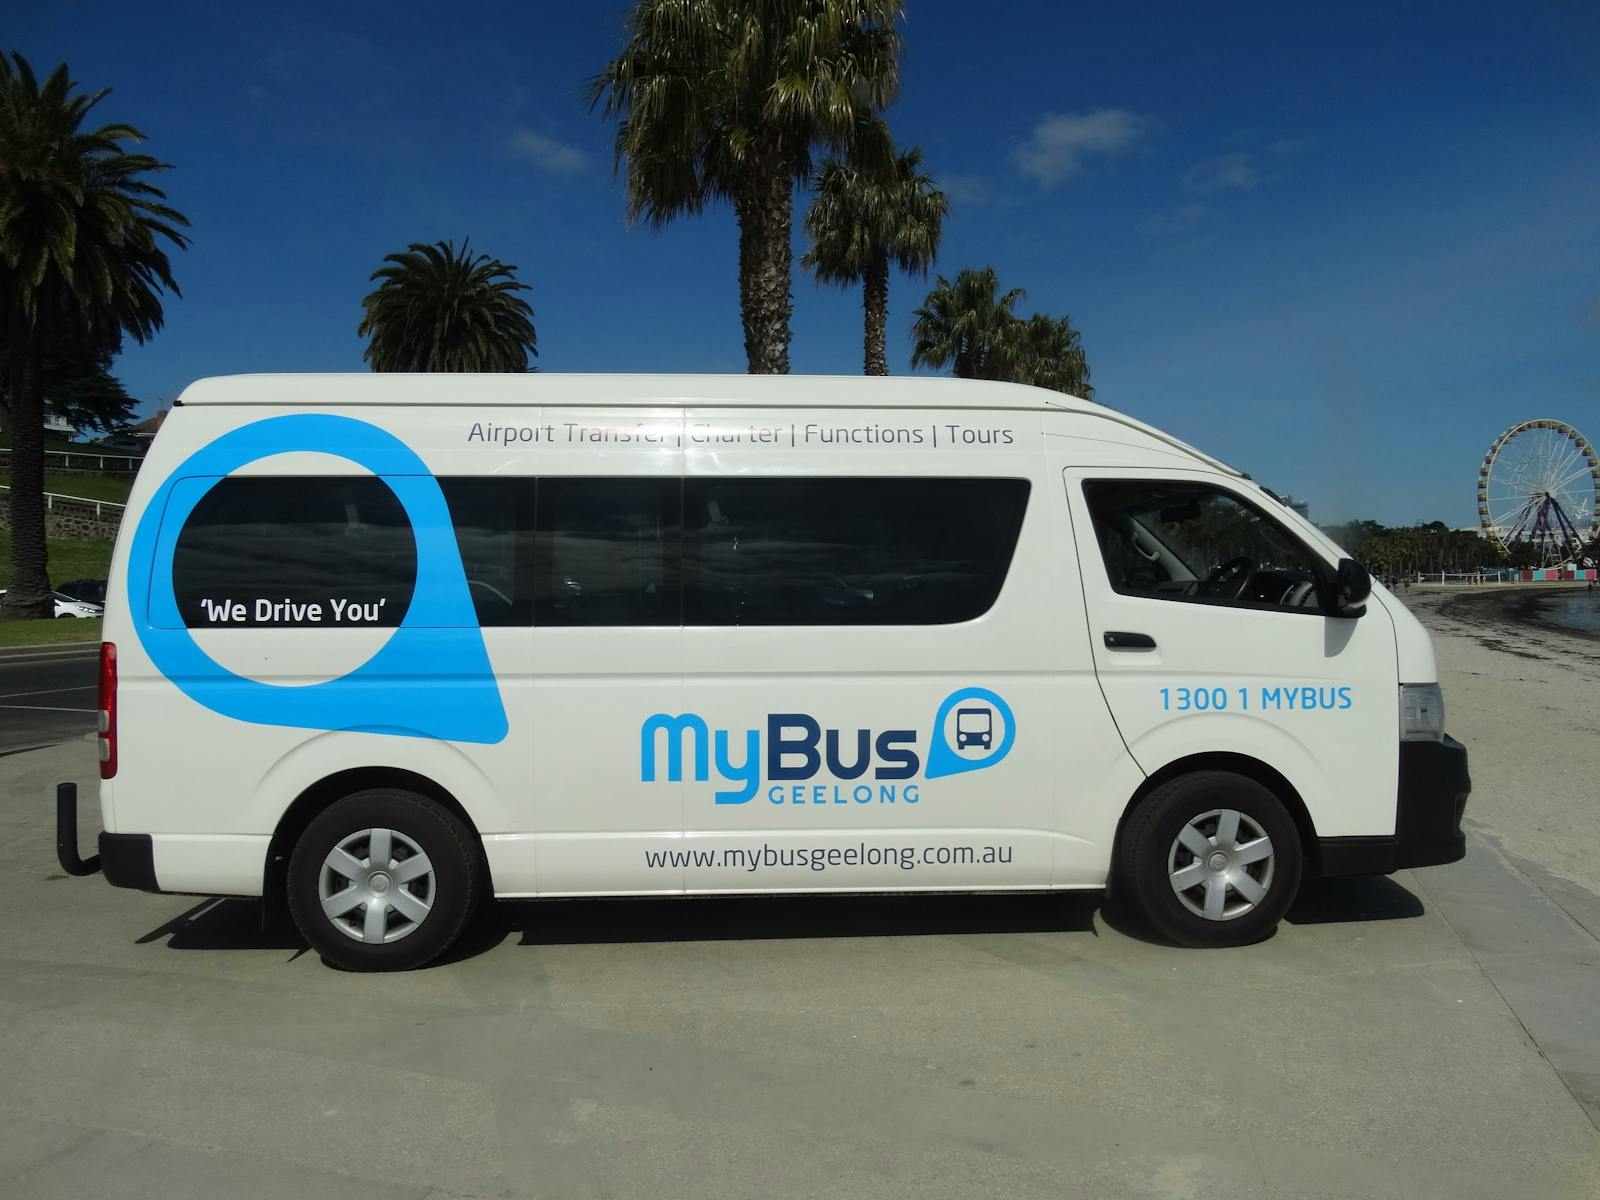 A MyBus Geelong van is parked at Geelong waterfront, the palm trees are in the background.